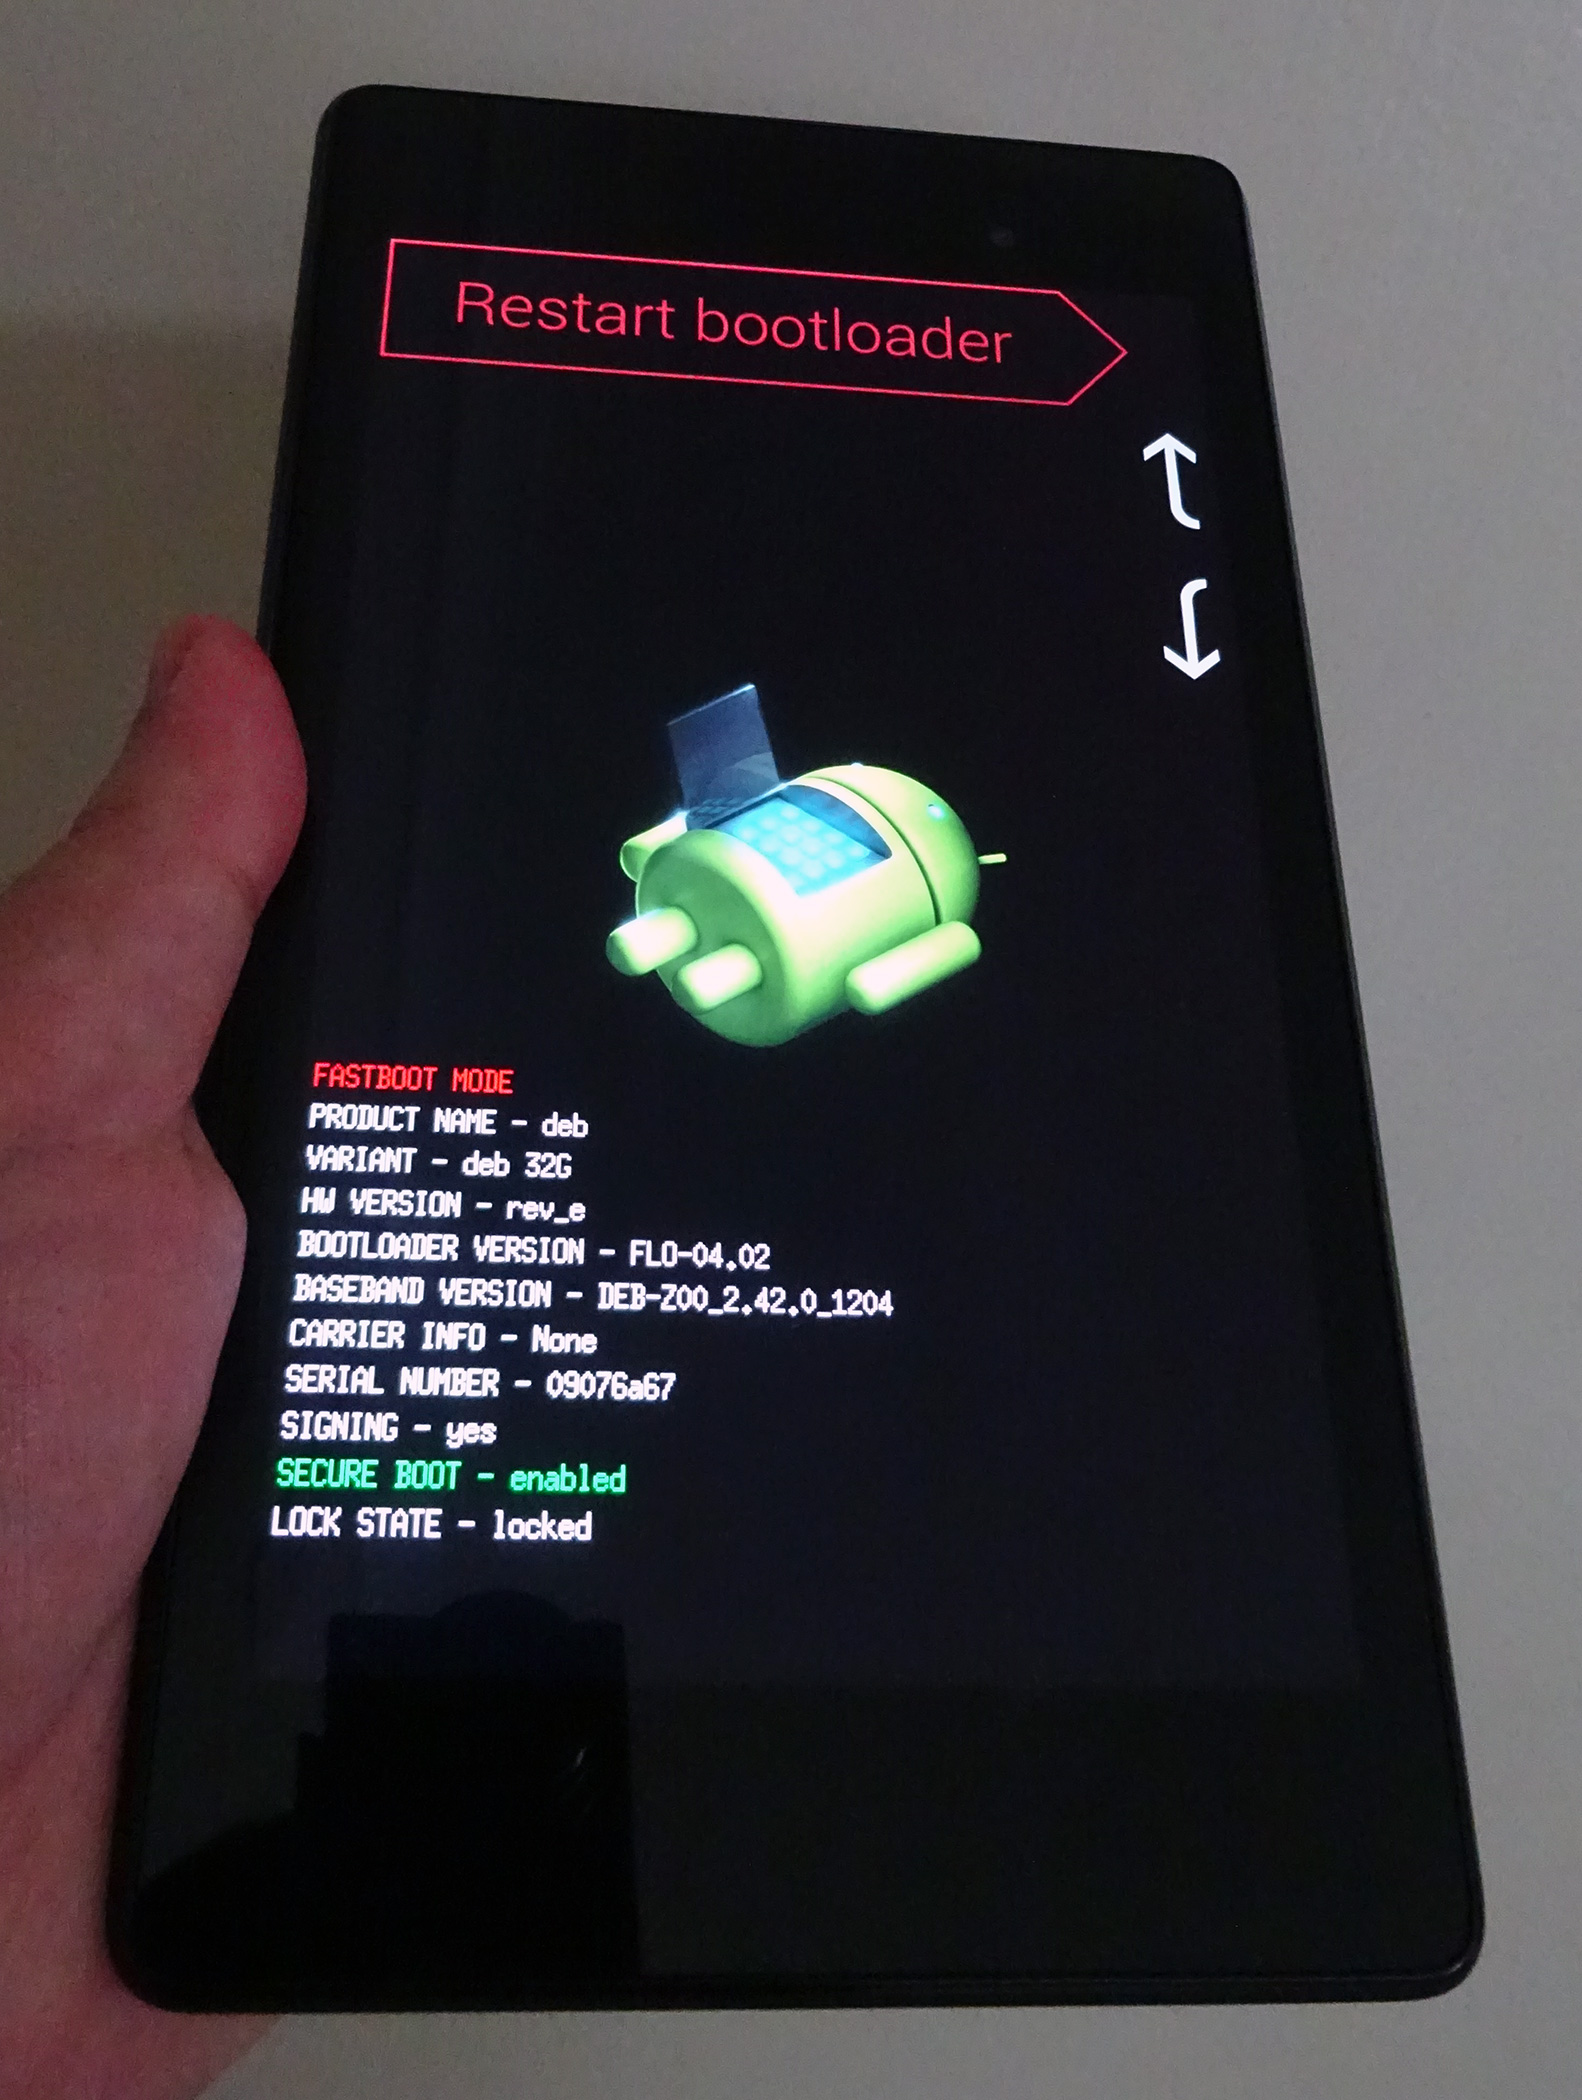 Reboot for android. Bootloader. Бутлоадер андроид. Рестарт Bootloader. Reboot to Bootloader самсунг.